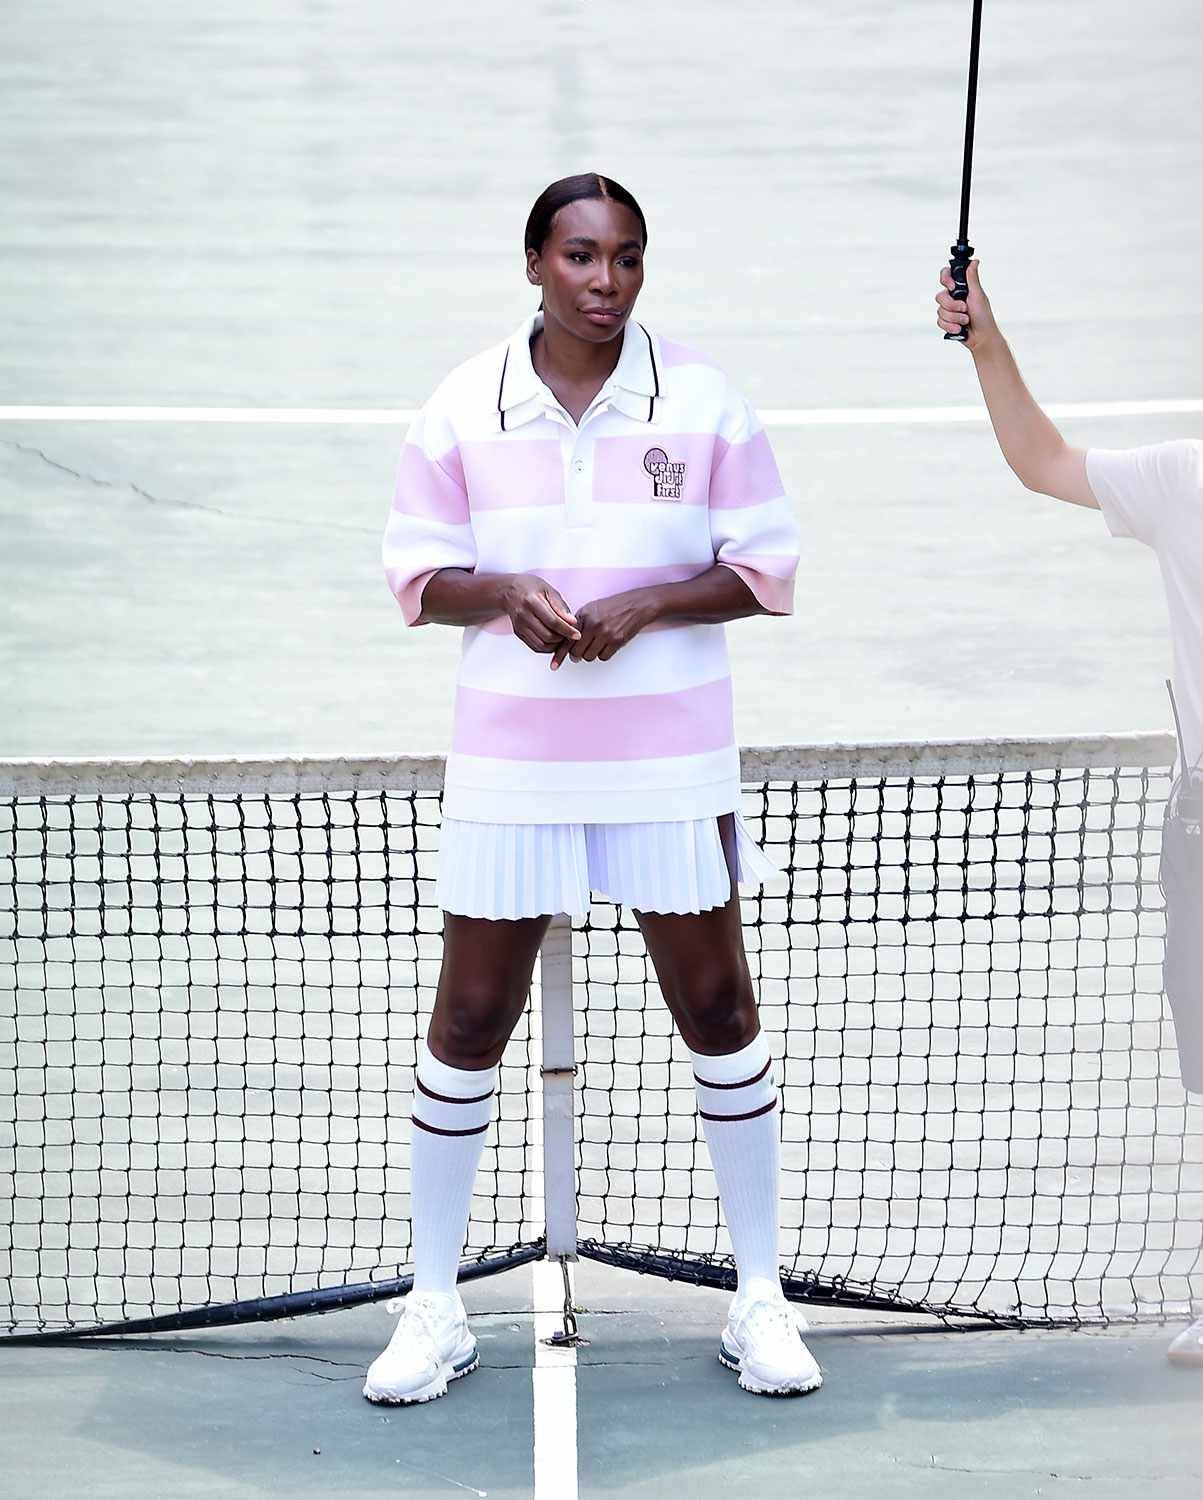 enus Williams is spotted during a photoshoot for Lacoste in New York City. The American professional tennis player modeled several different outfits on the tennis courts before taking the shoot to the streets. 